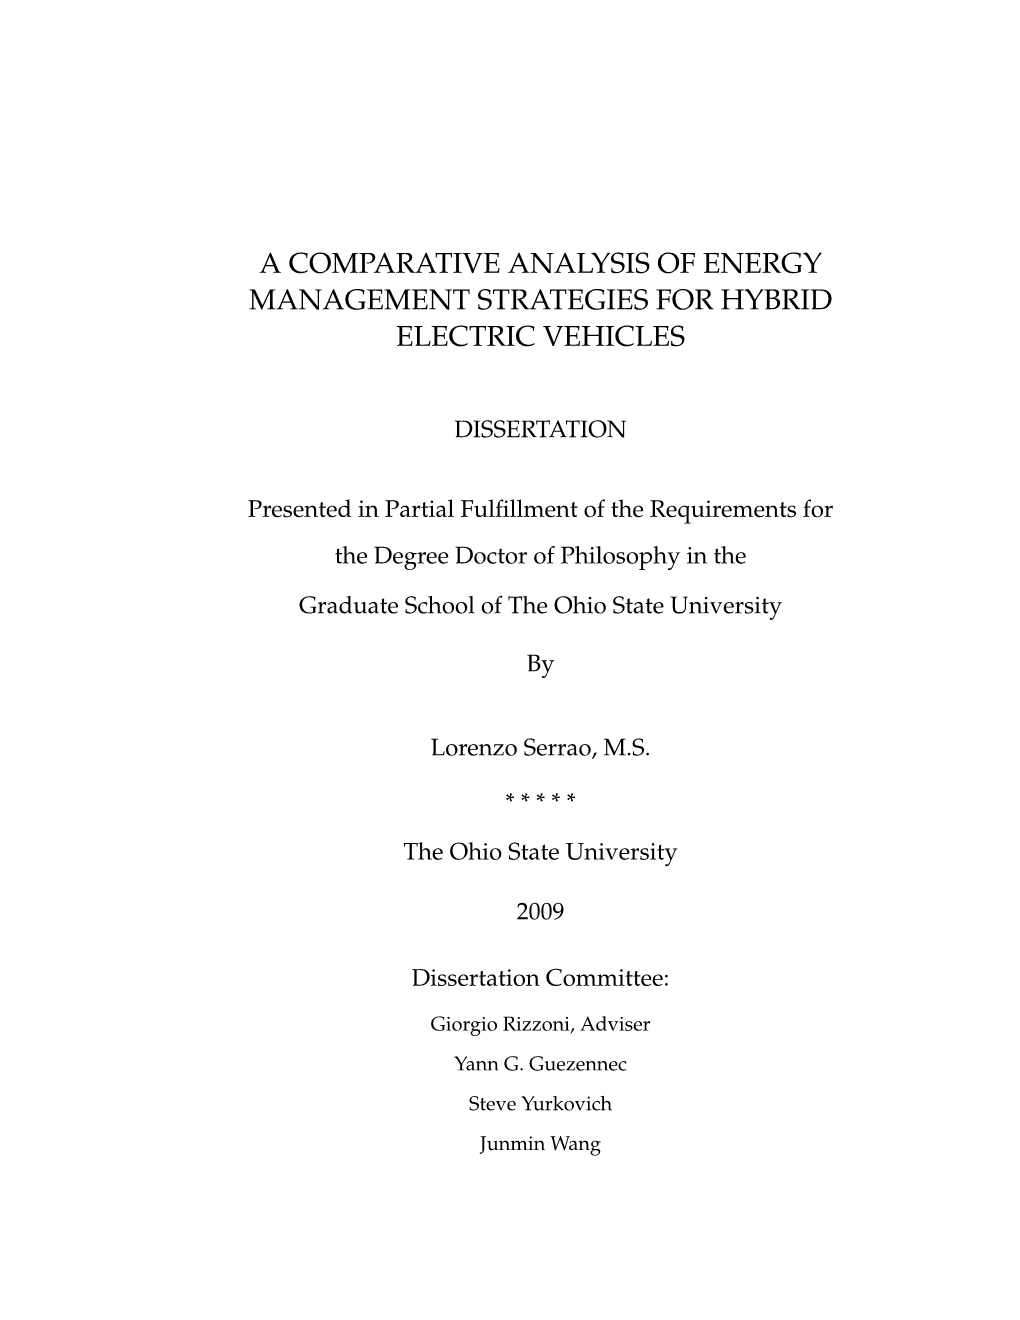 A Comparative Analysis of Energy Management Strategies for Hybrid Electric Vehicles